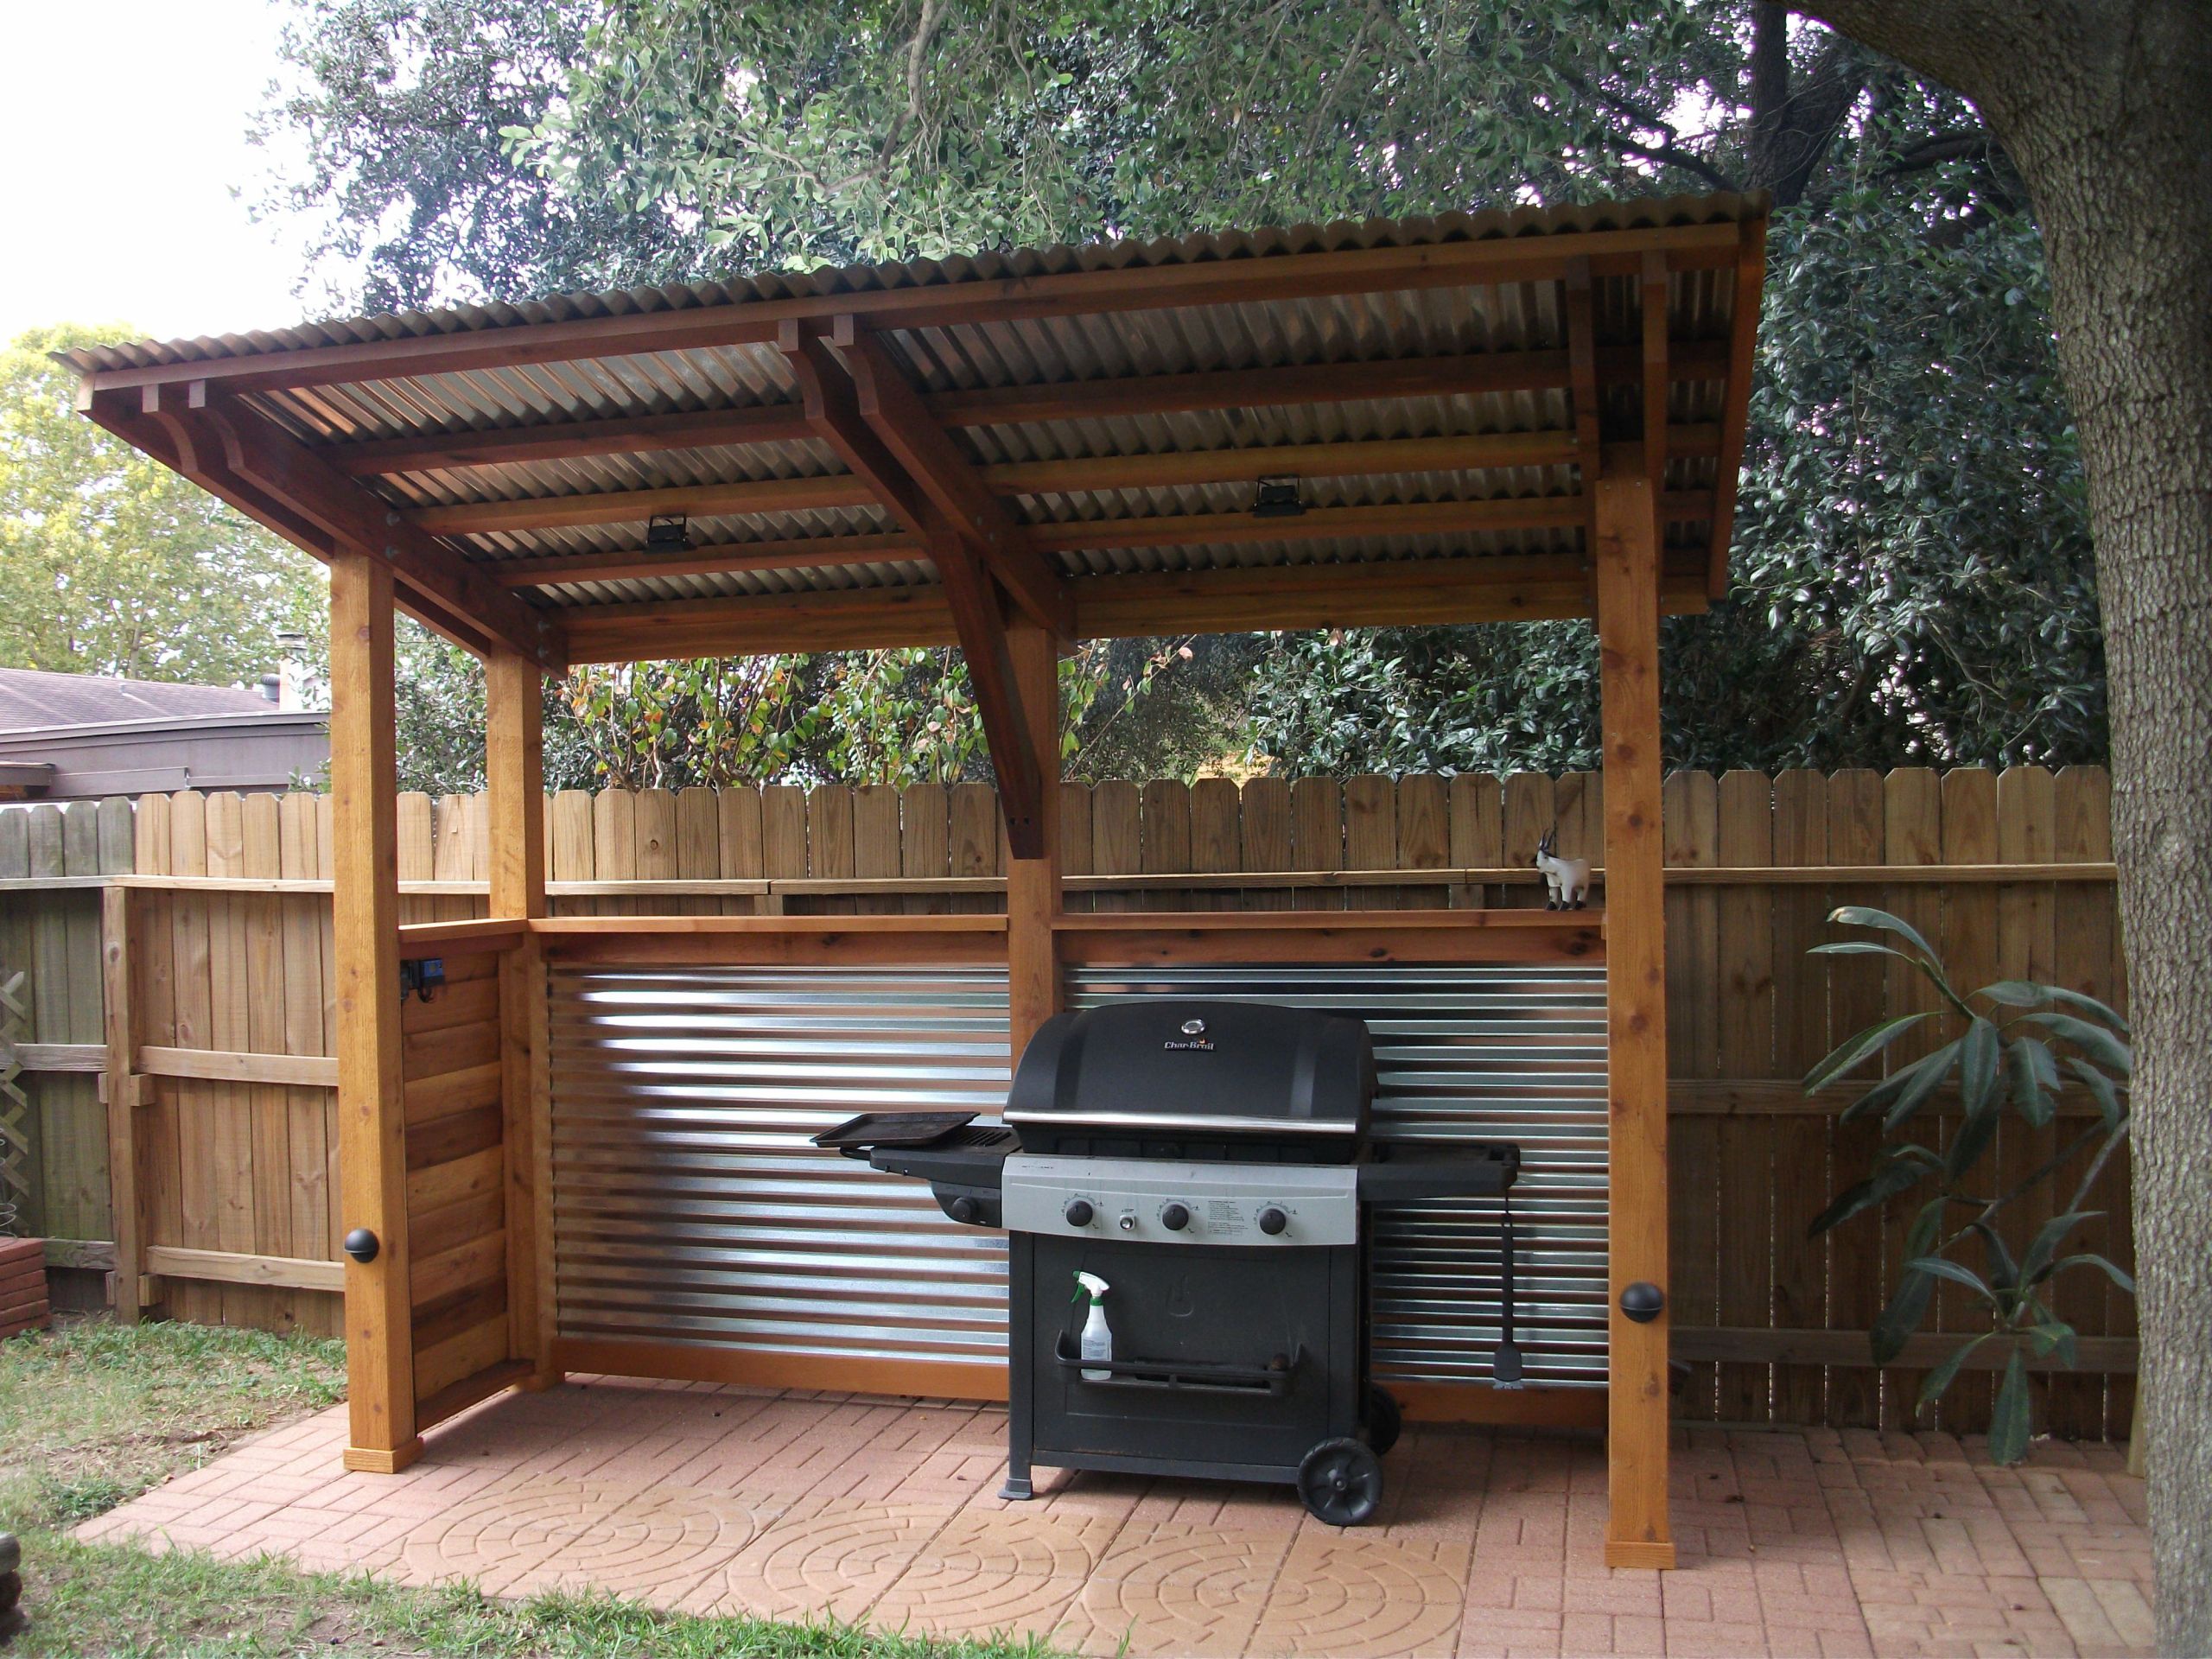 DIY Grill Gazebo Plans
 Pin by Thomas Reichelt on My New Grill Area